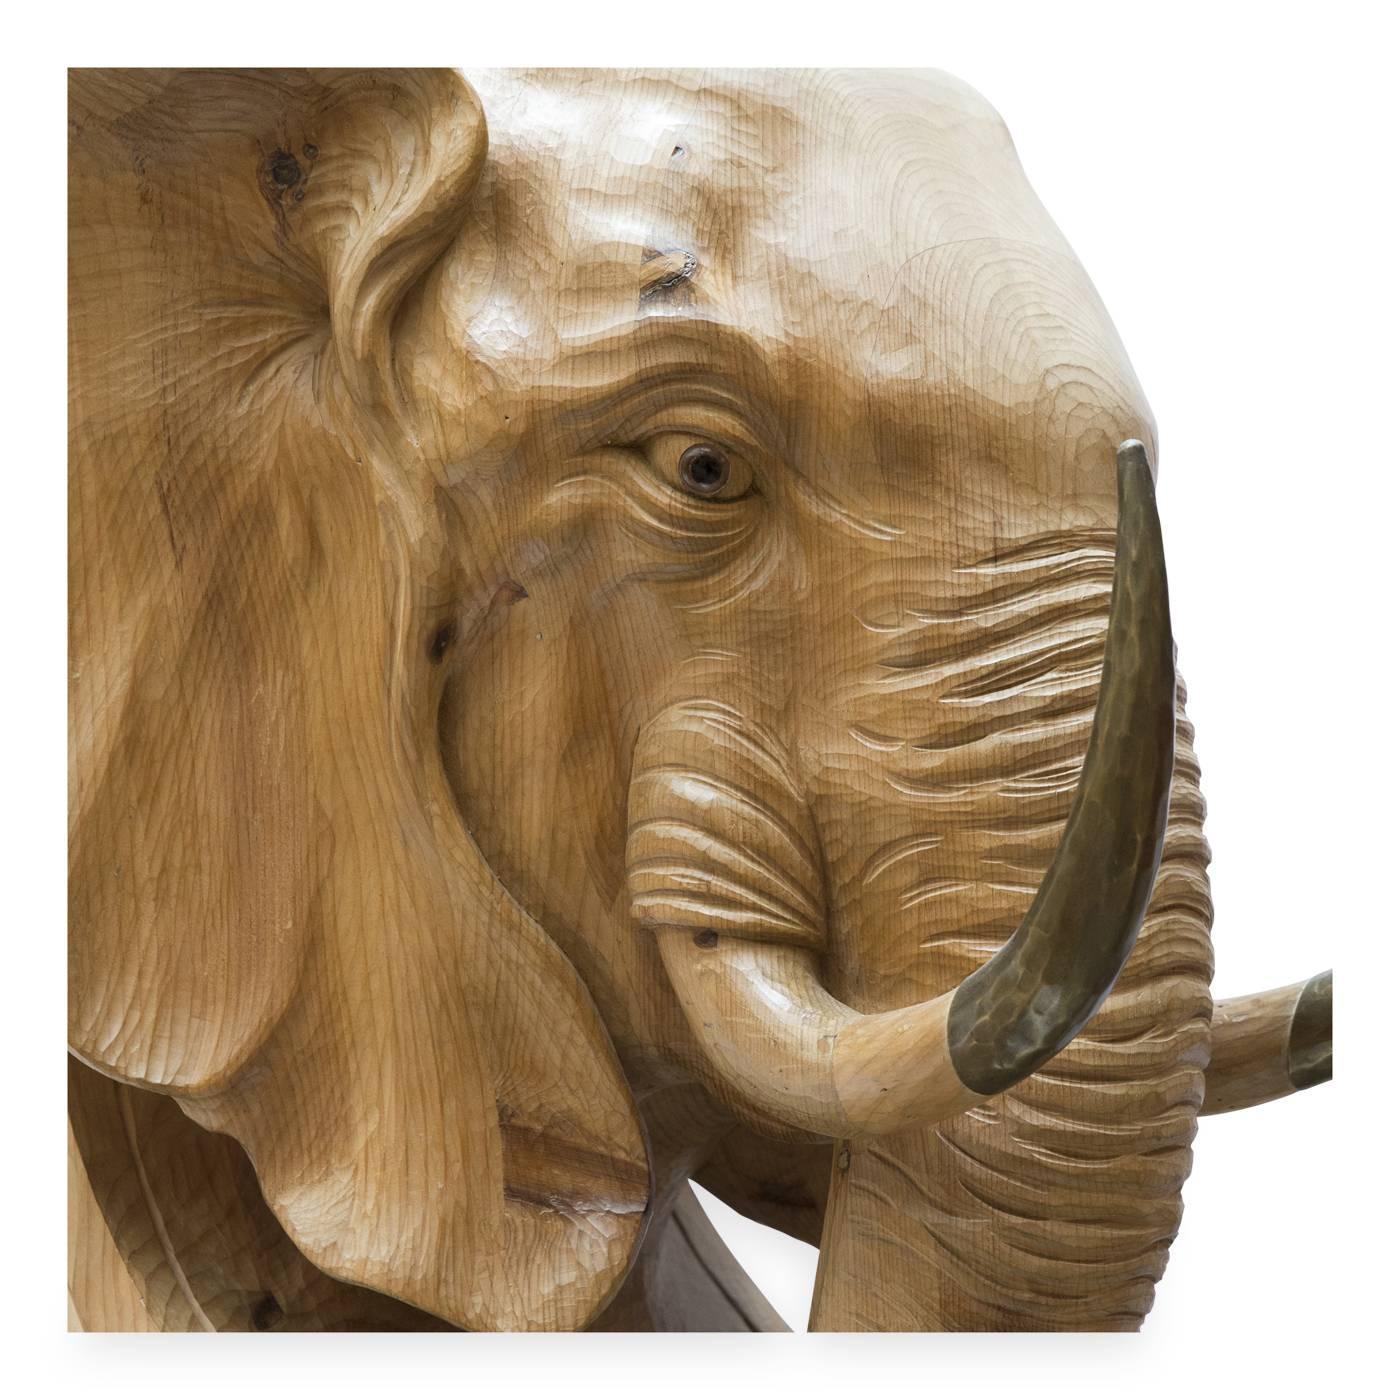 This magnificent elephant sculpture by Bartolozzi e Maioli serves as a stylish console table base. Designed in 1975 for a private South African residence, the piece is entirely hand-carved out of a block of Austrian pine, with impressive tusks